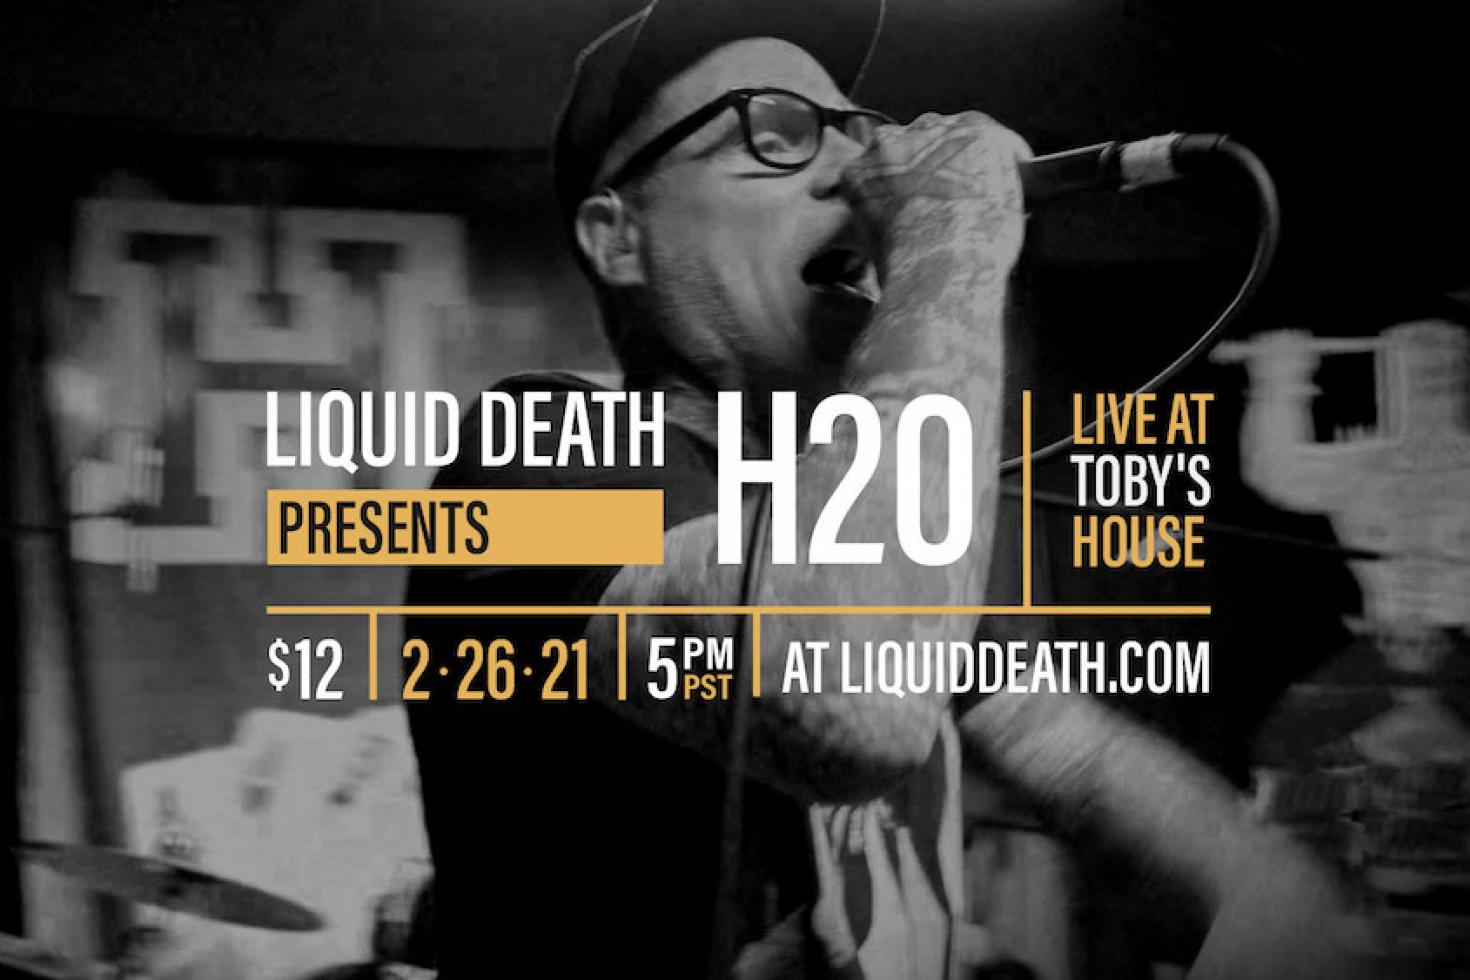 H2O and Liquid Death team up for 'Live At Toby's House' performance